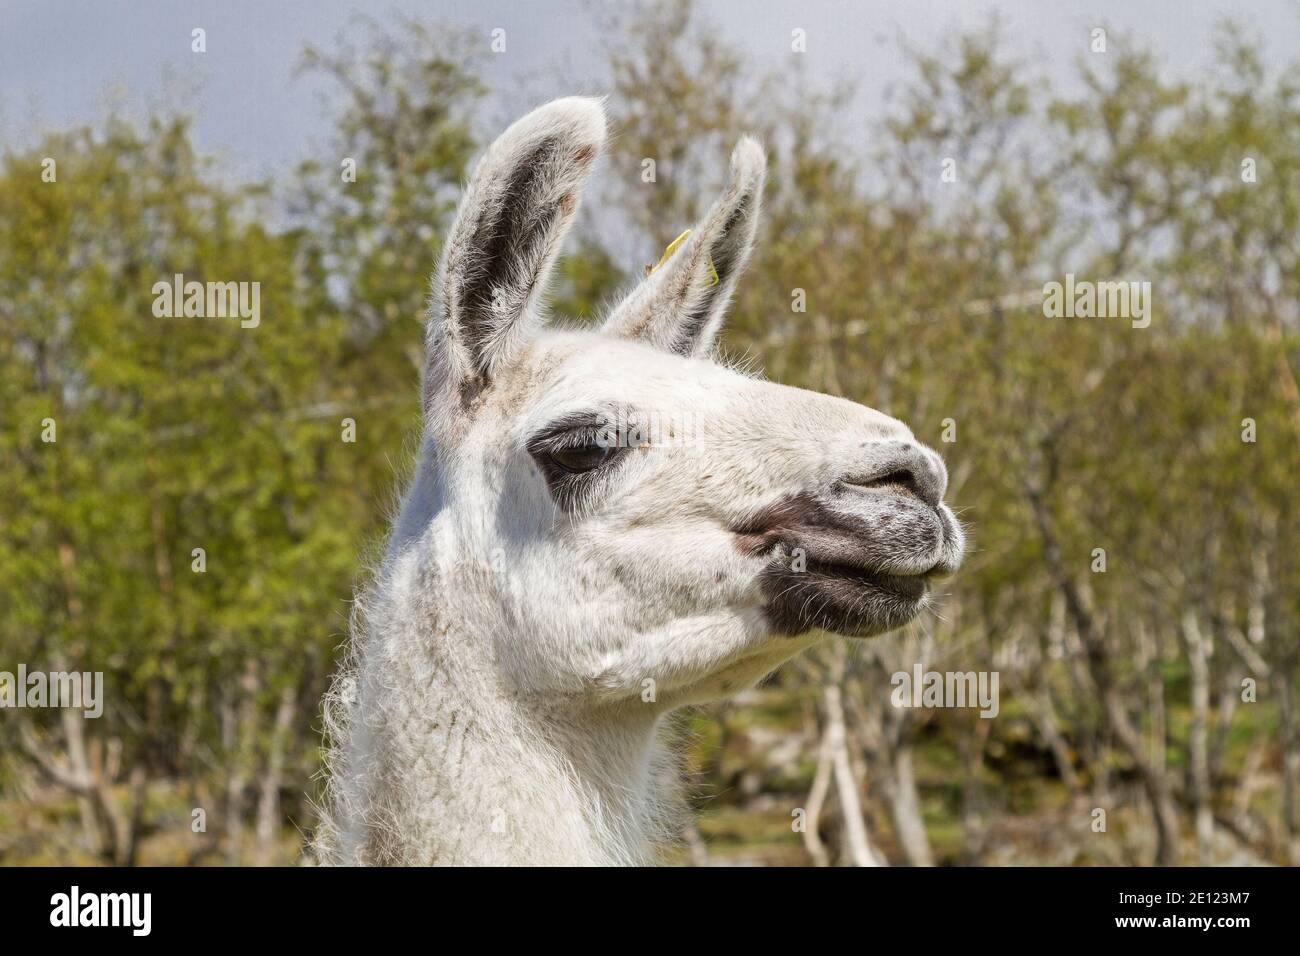 Head Of A Lama In Front Of Bush Background Stock Photo